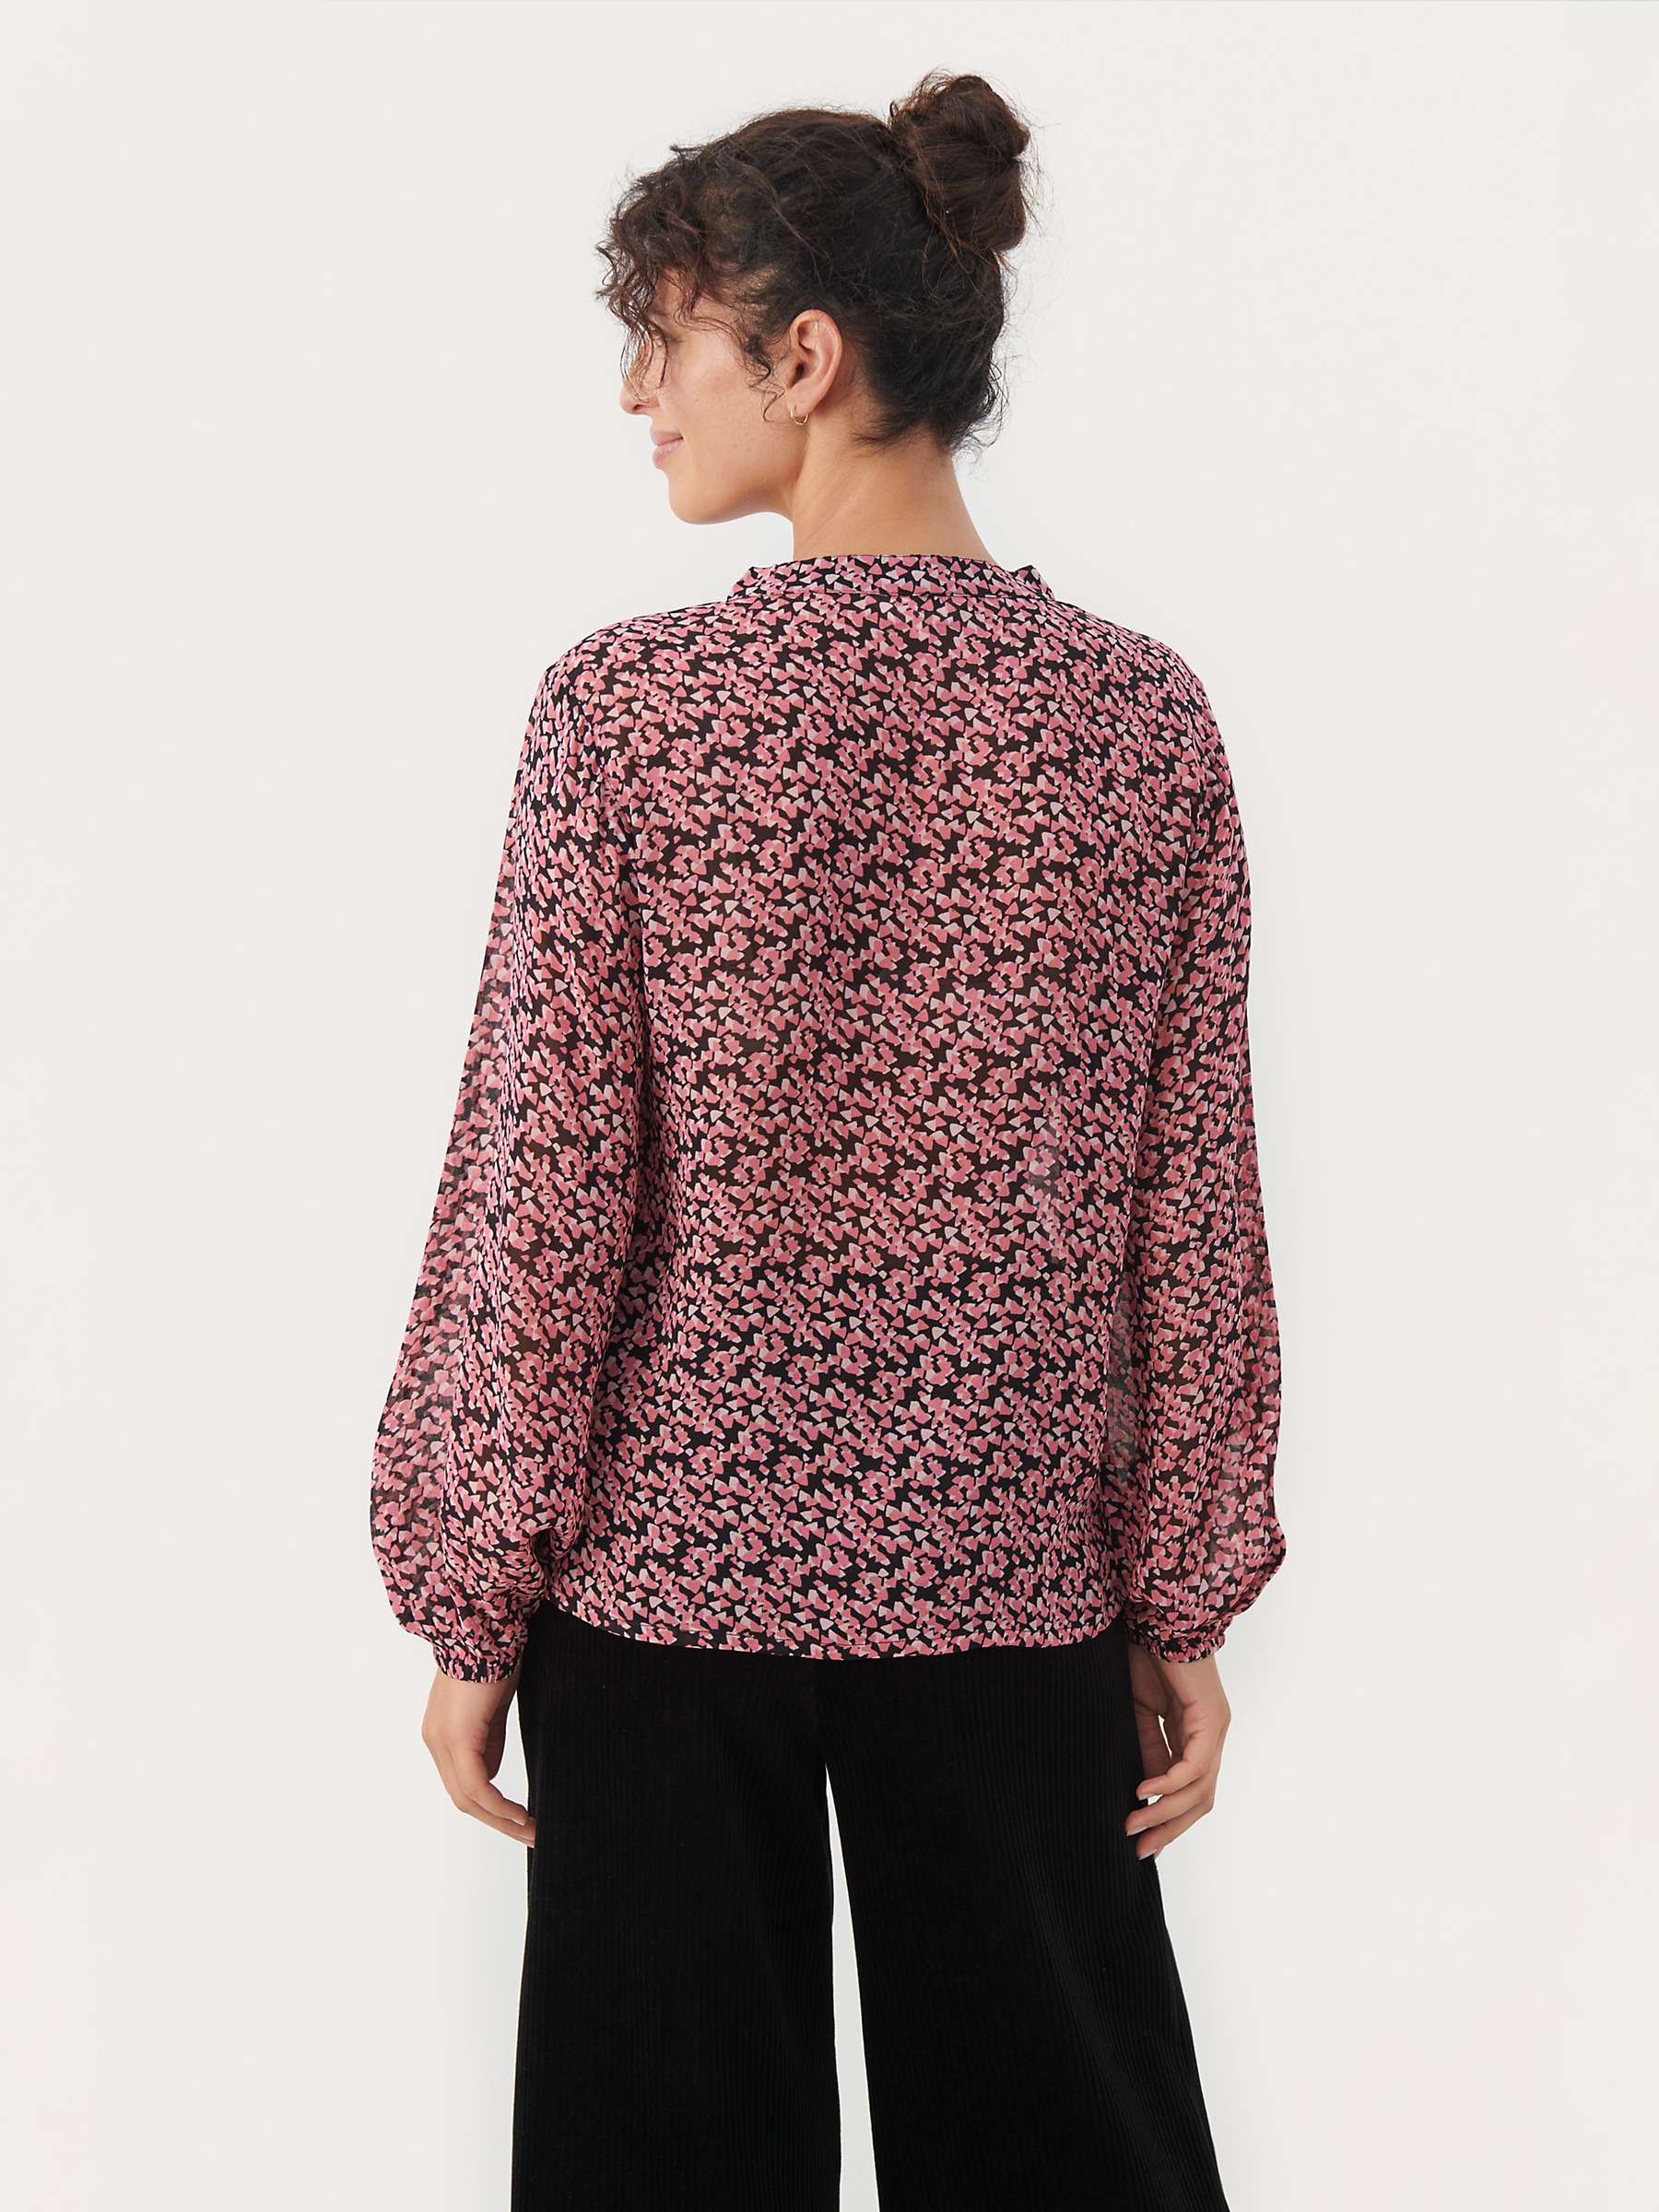 Buy Part Two Ditte Ditsy Print Blouse Online at johnlewis.com